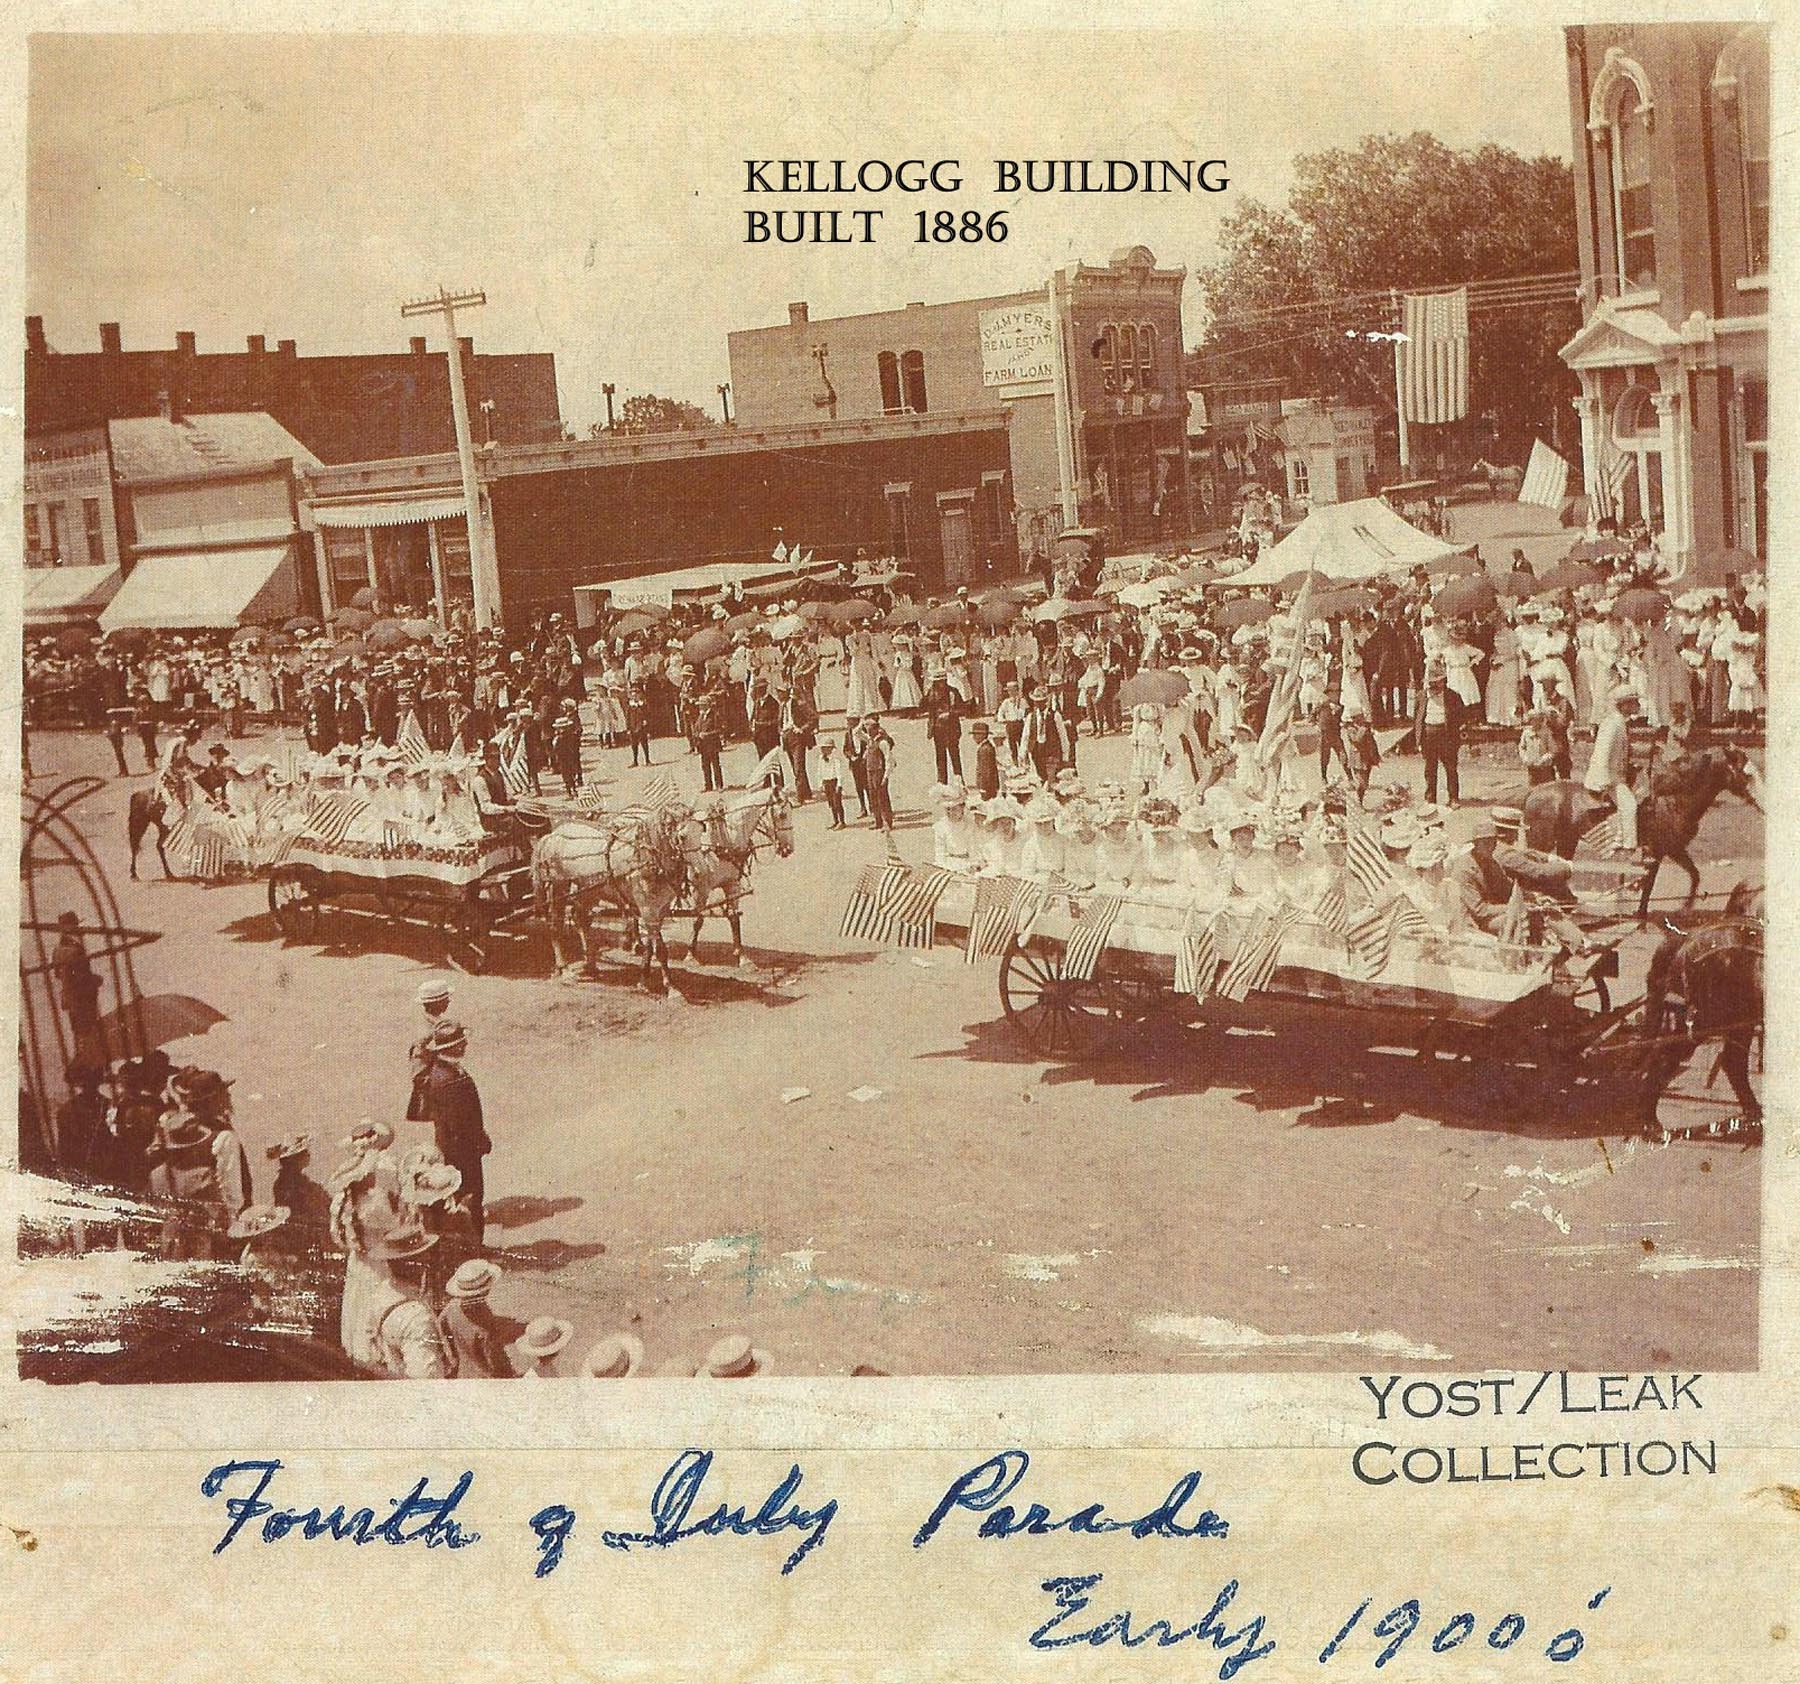 kellogg building shown in early 1900s parade - labeled